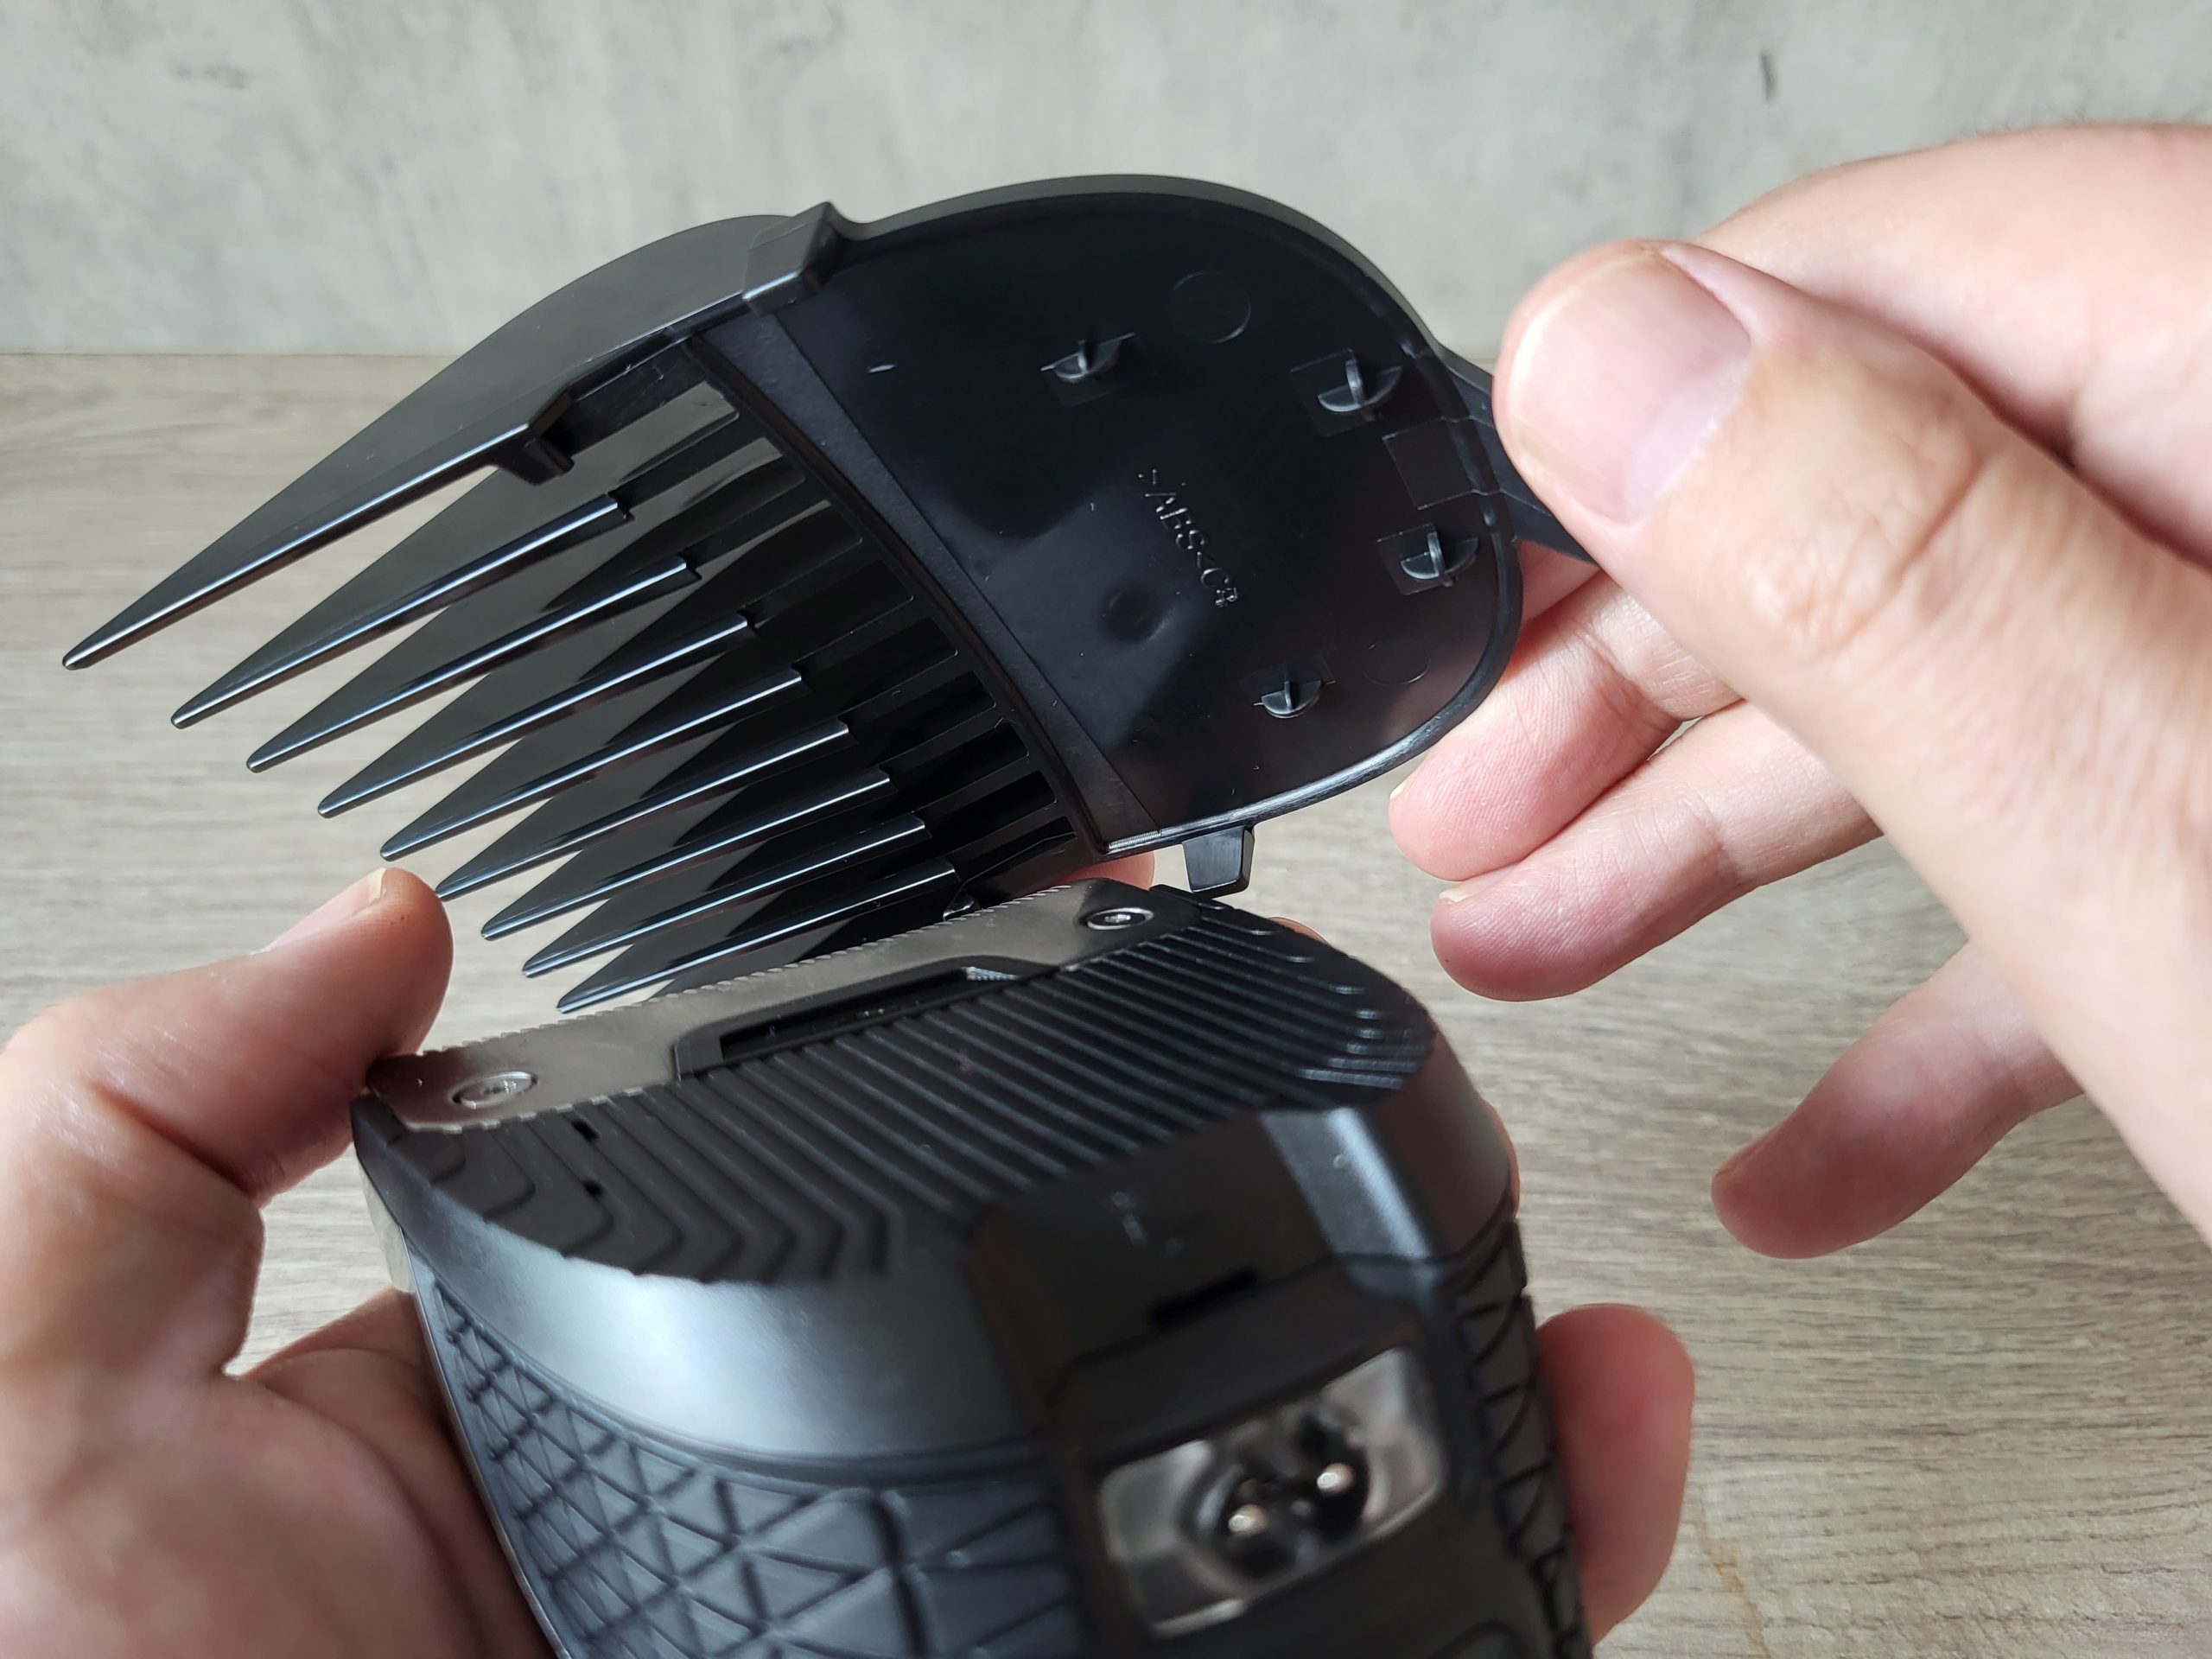 Attaching and removing Remington HC4300 clipper combs 